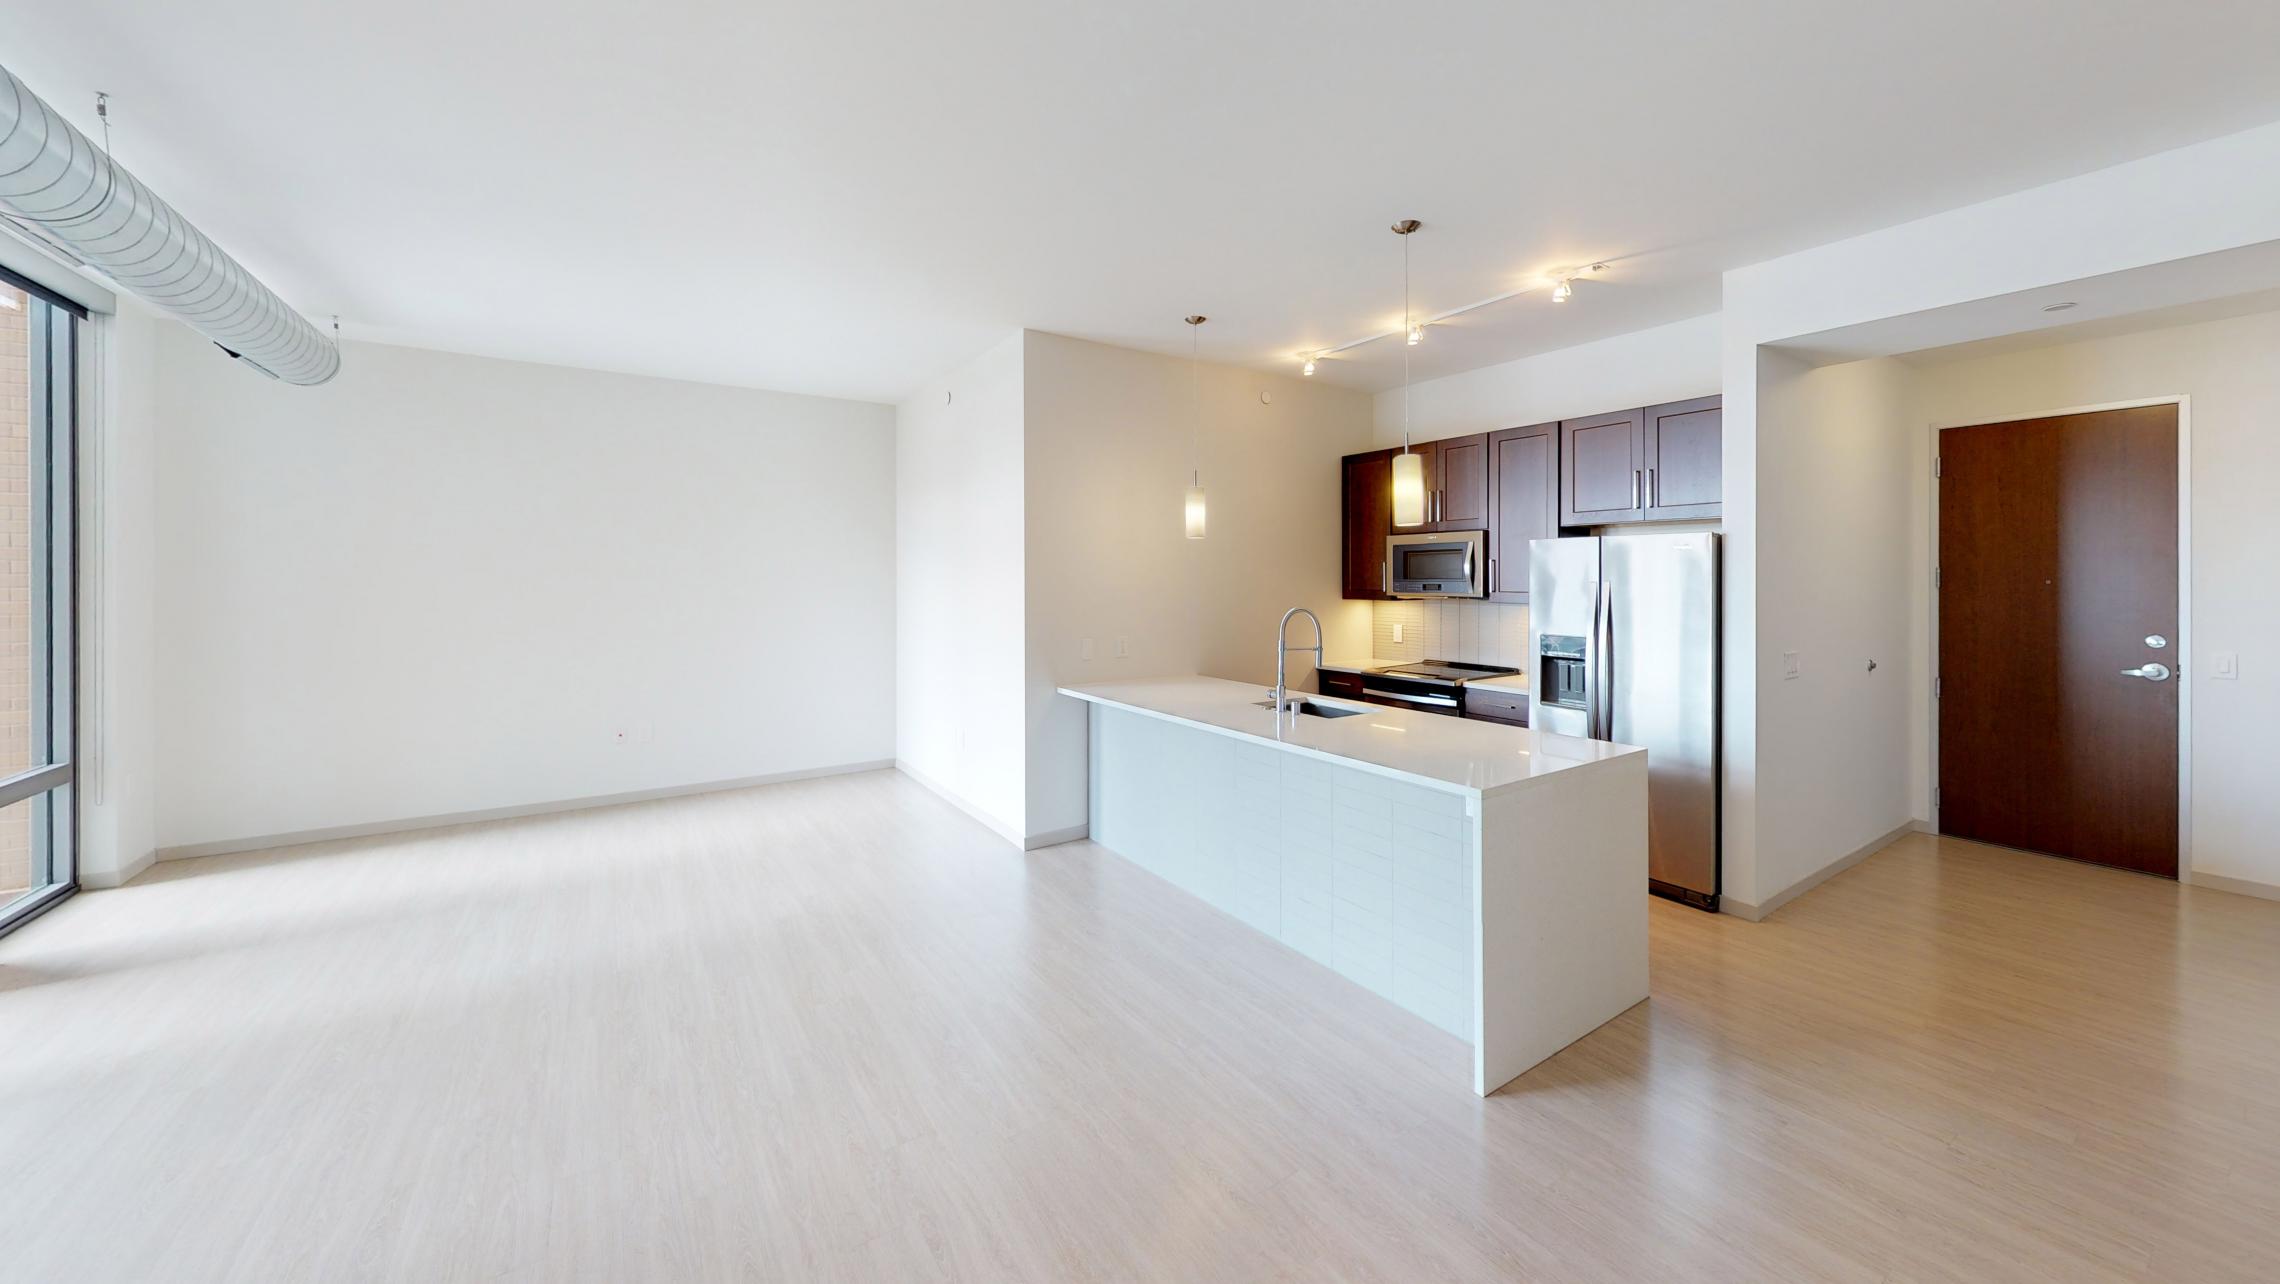 Pressman-Apartment-504-One-Bedroom-Balcony-City-View-Luxury-Downtown-Upscale-Modern-Downtown-Madison-Capitol-Square-Kitchen-Entrance